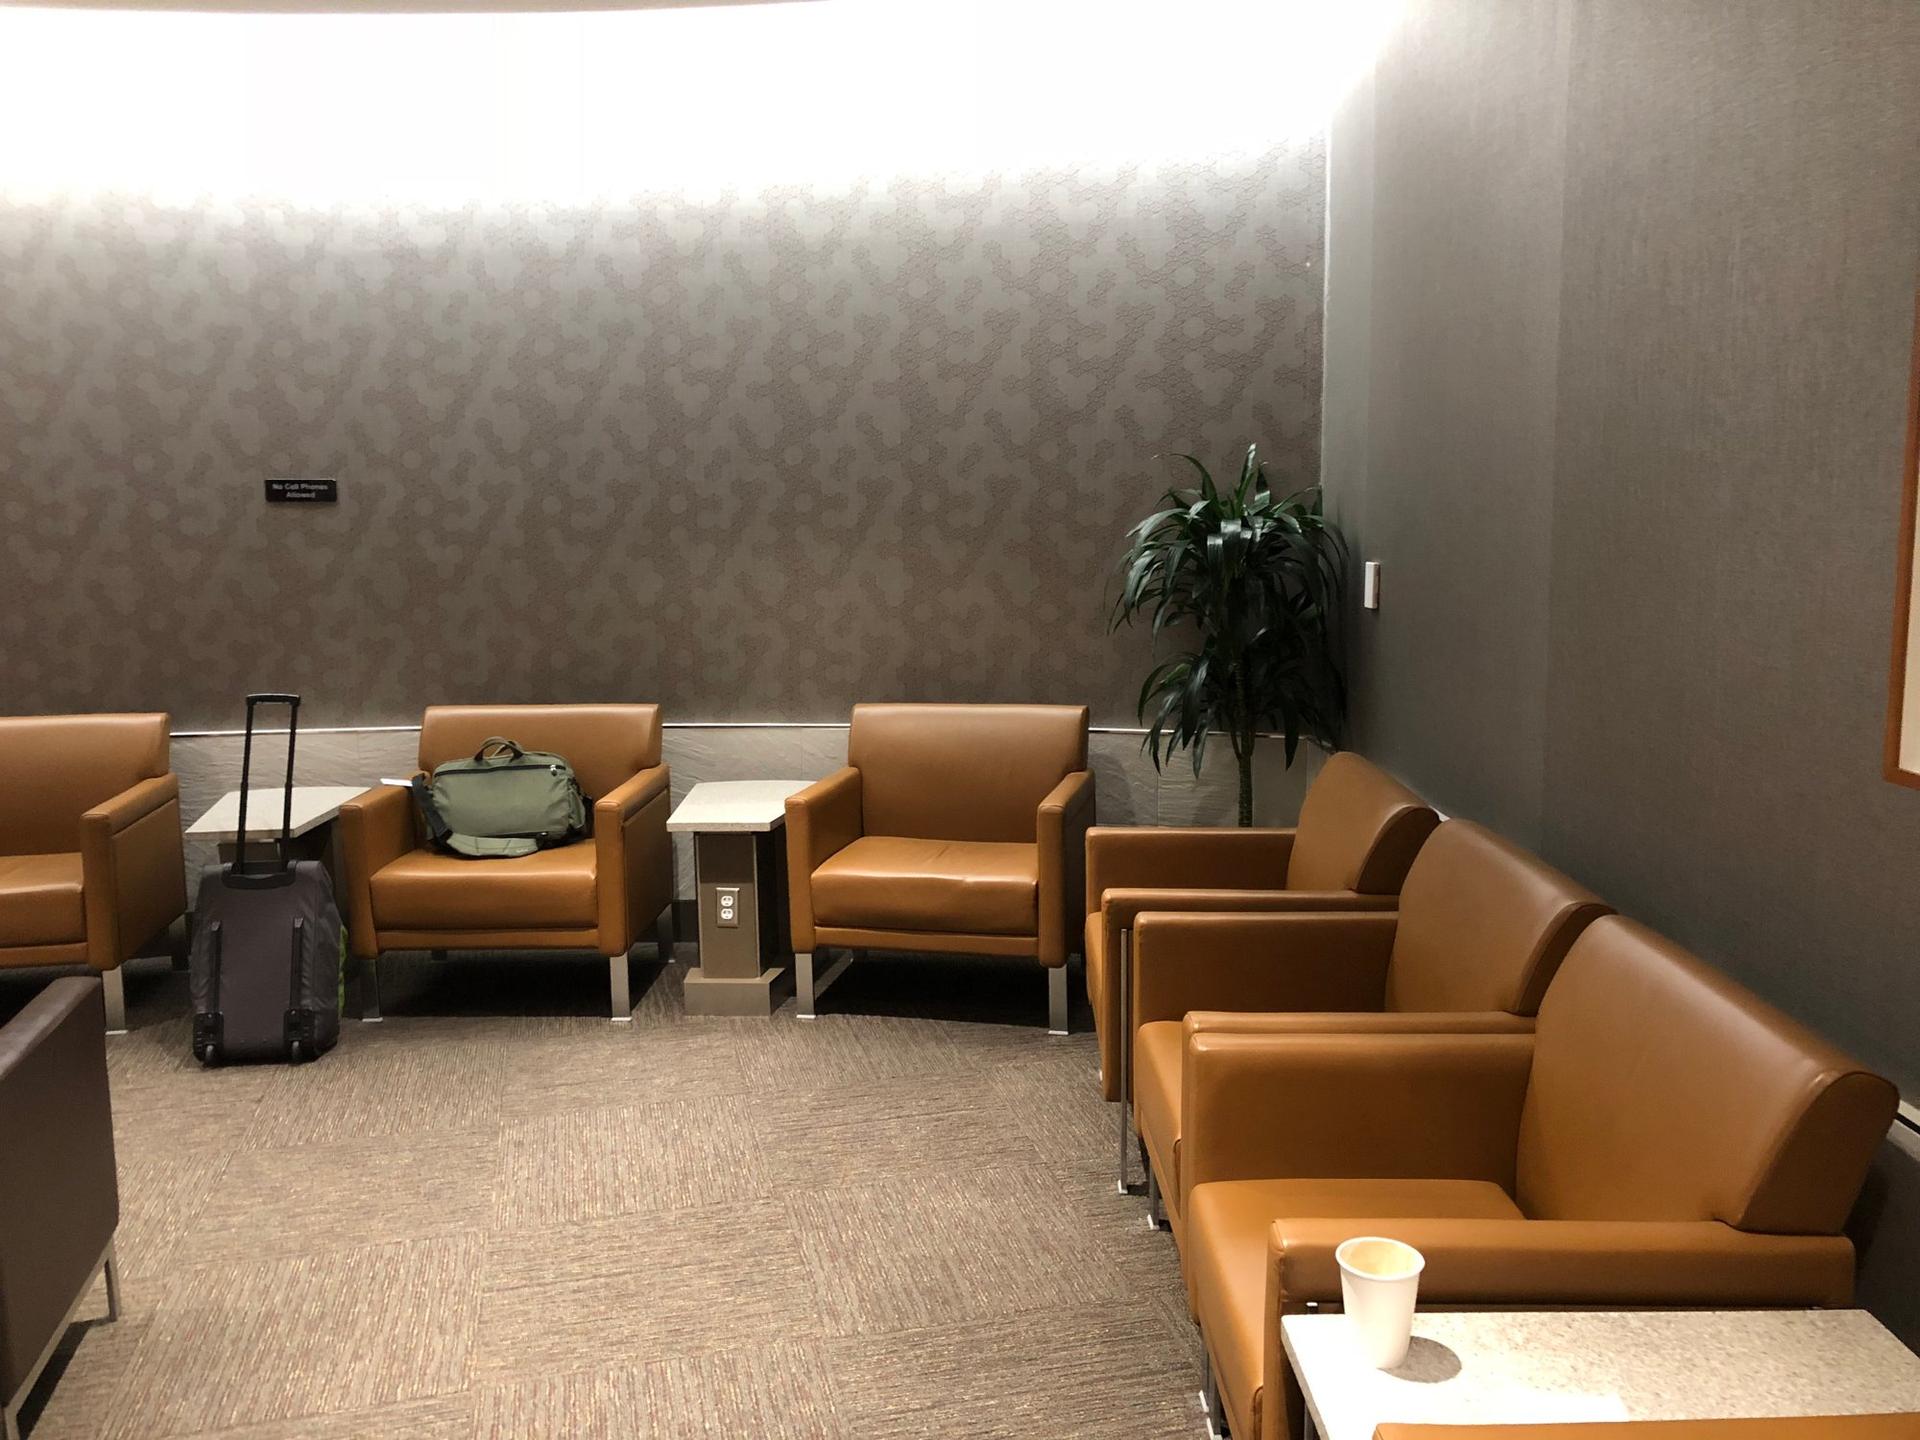 American Airlines Admirals Club image 6 of 12